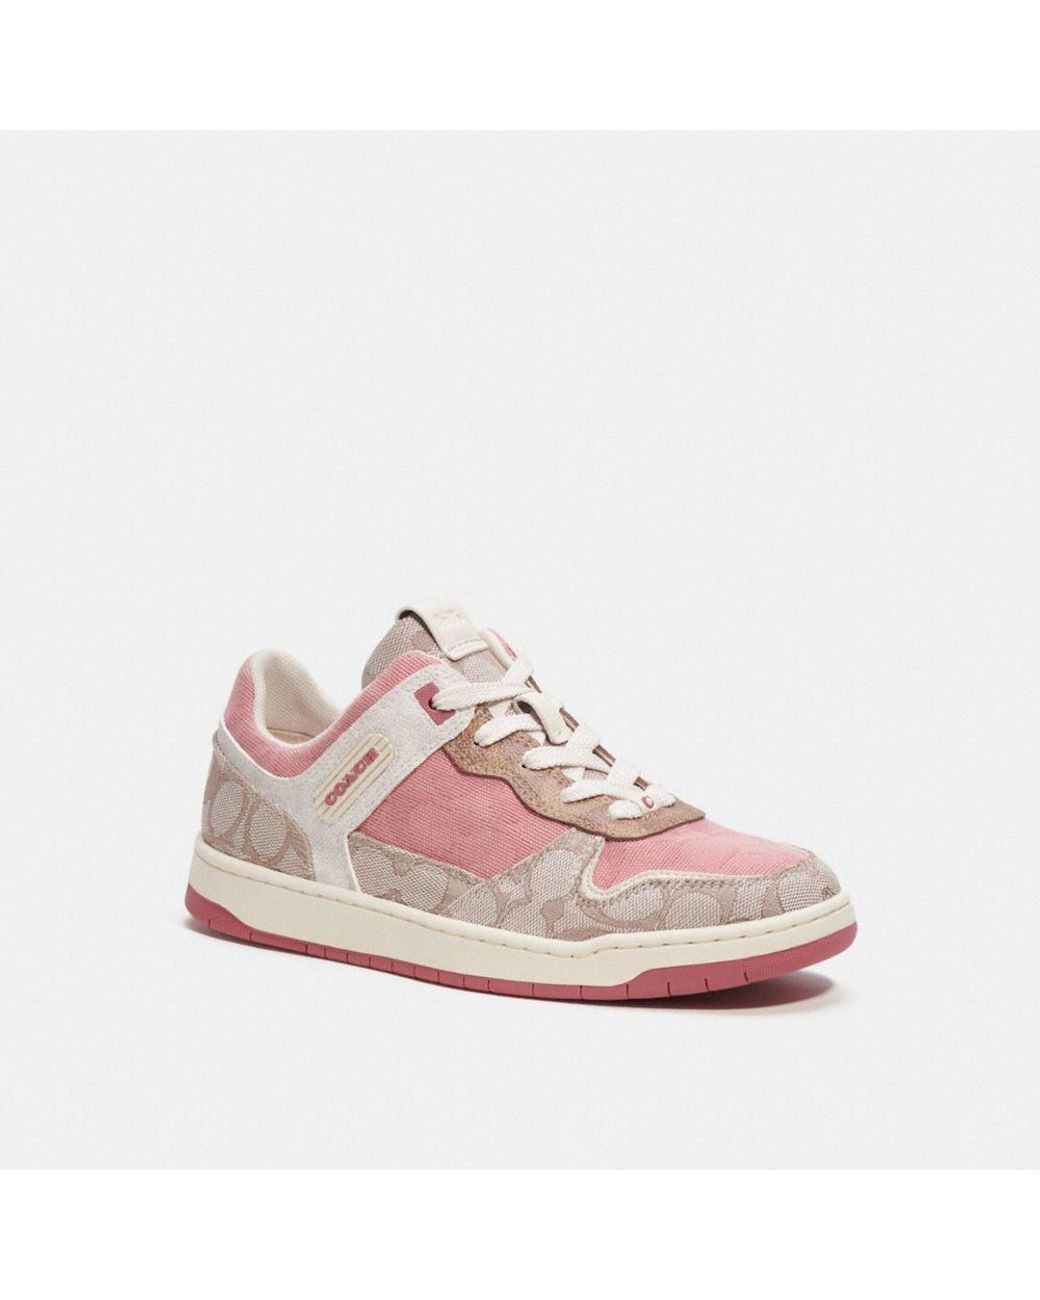 COACH C201 Low Top Sneaker In Signature in Pink | Lyst